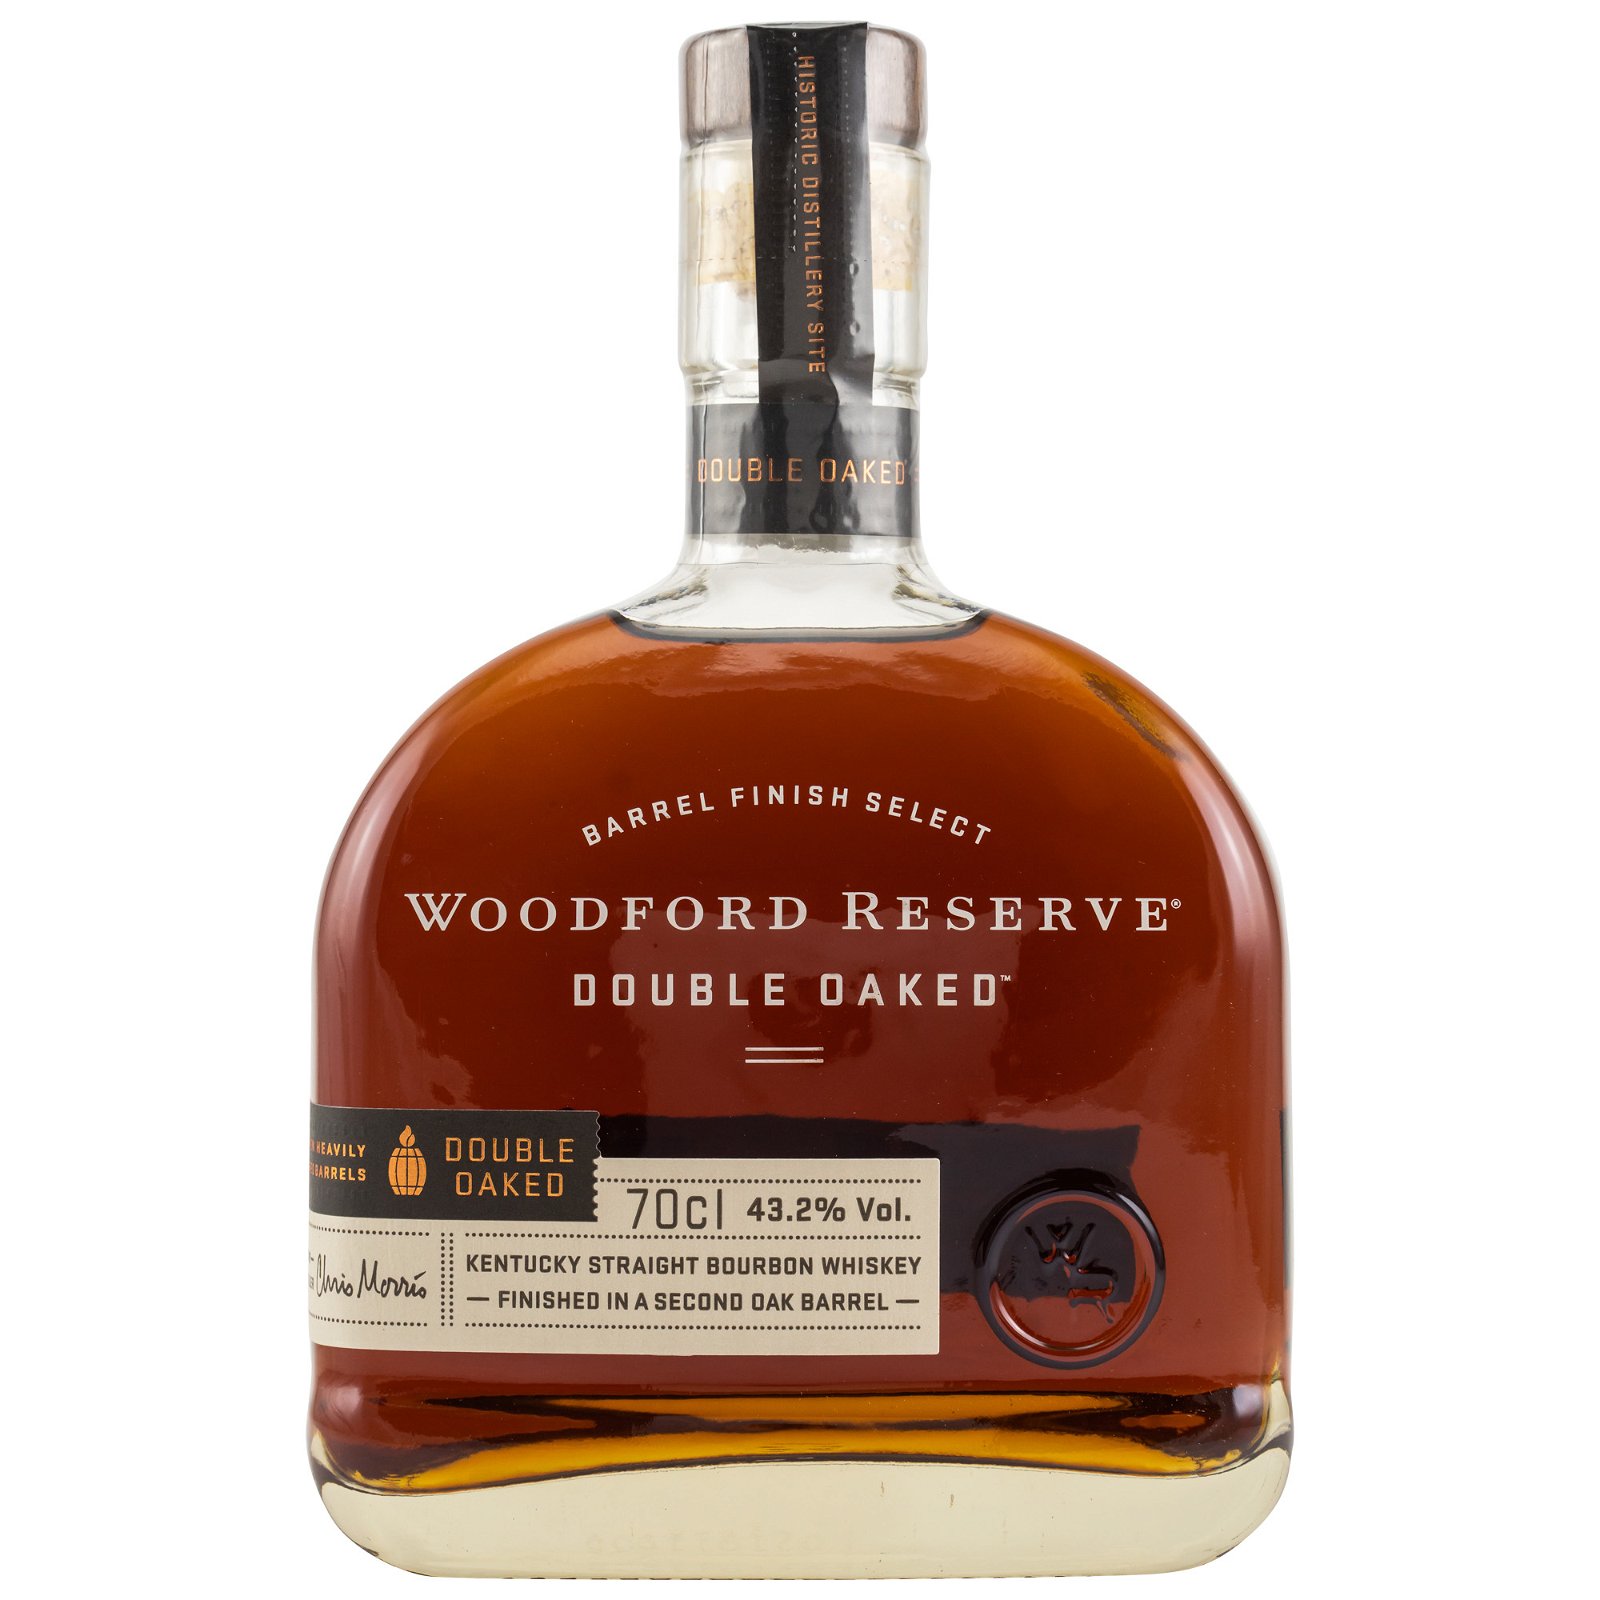 Woodford Reserve Barrel Finish Select Double Oaked - Dekanterflasche (USA: Bourbon)